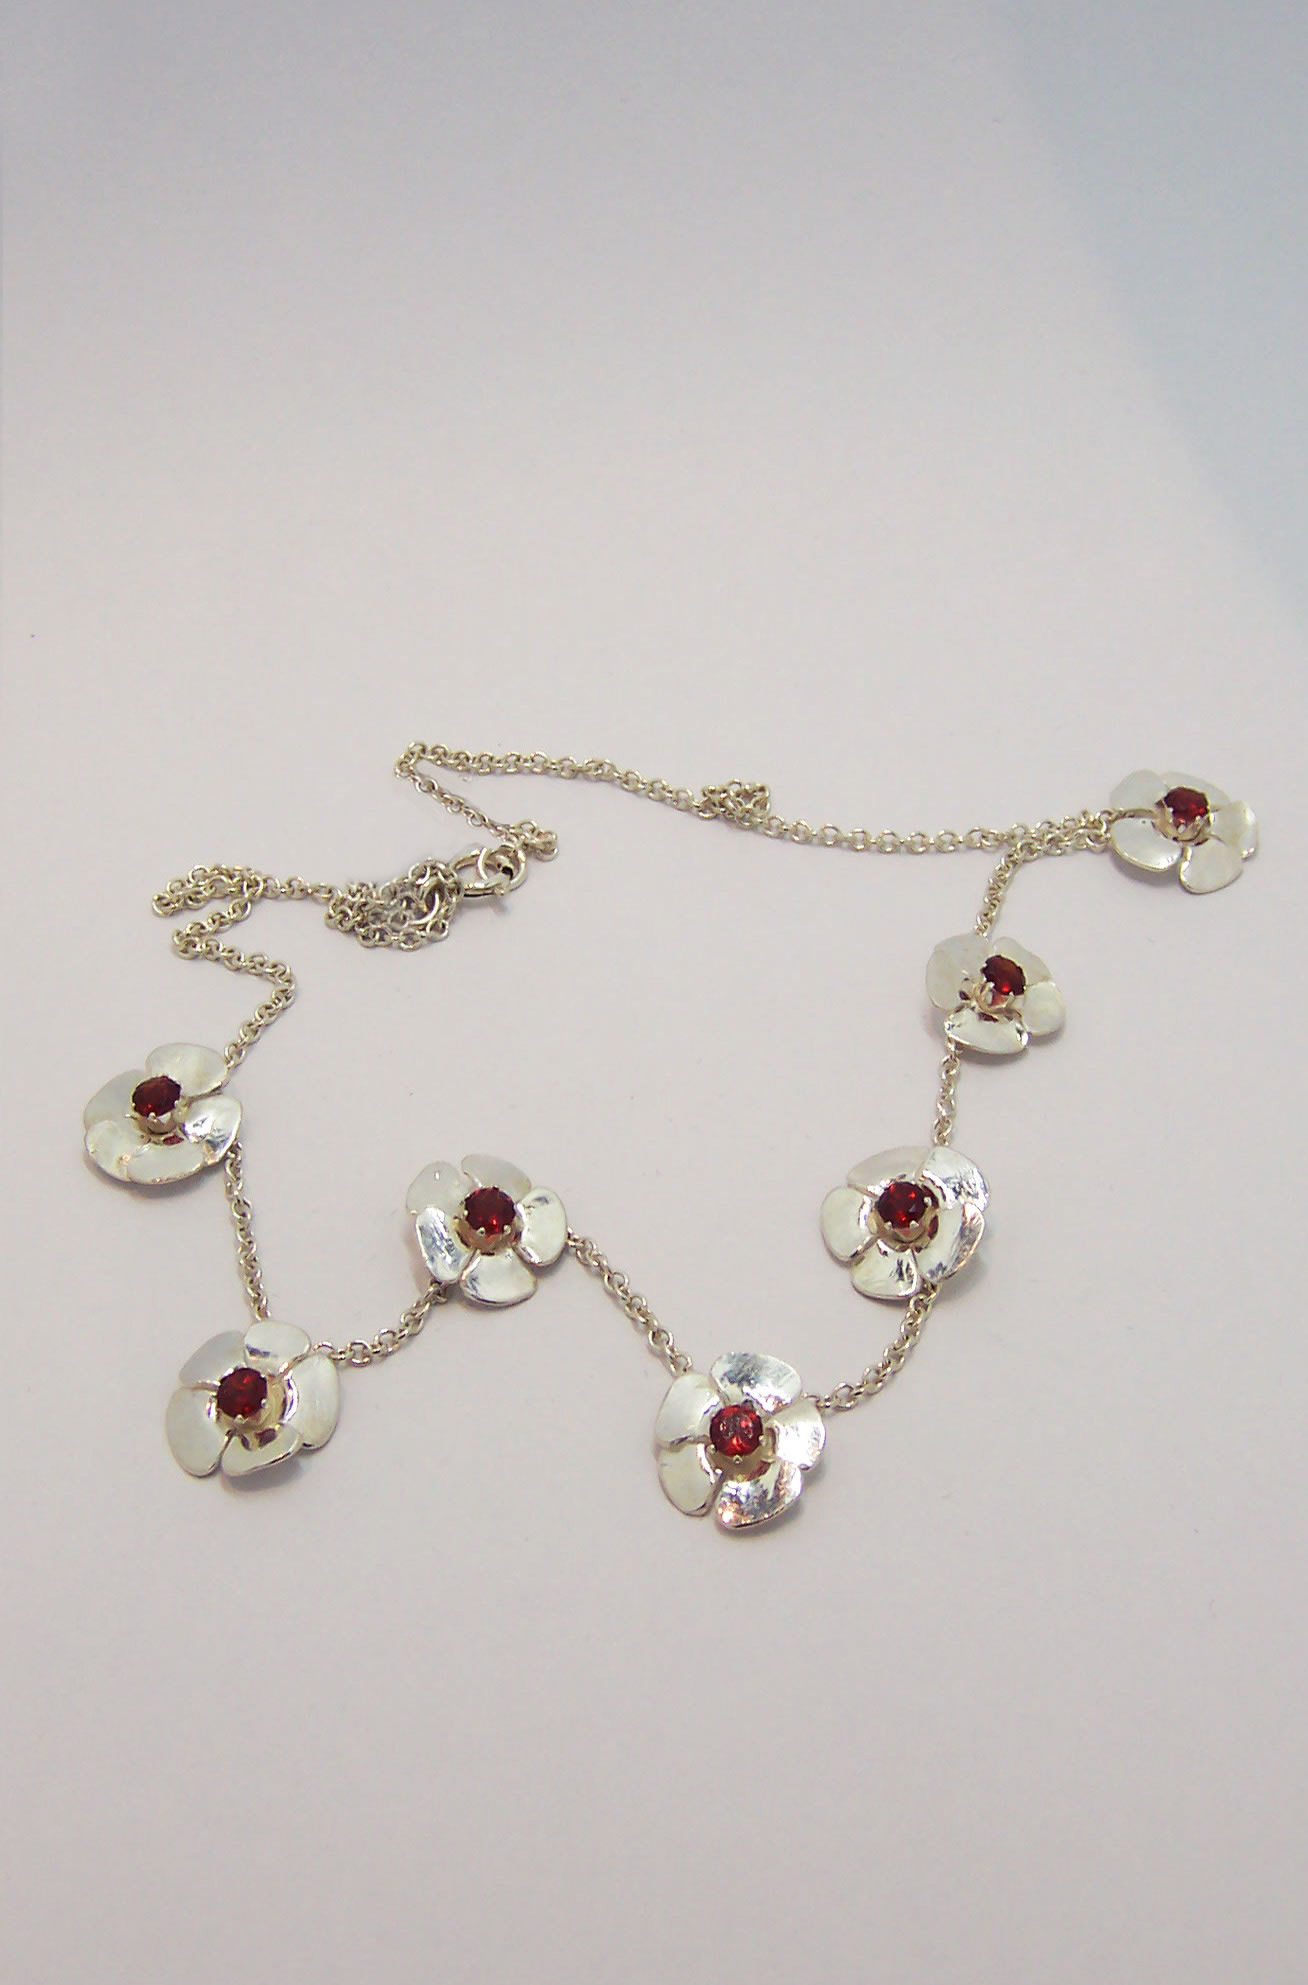 Silver and Garnet Daisy Chain Necklace